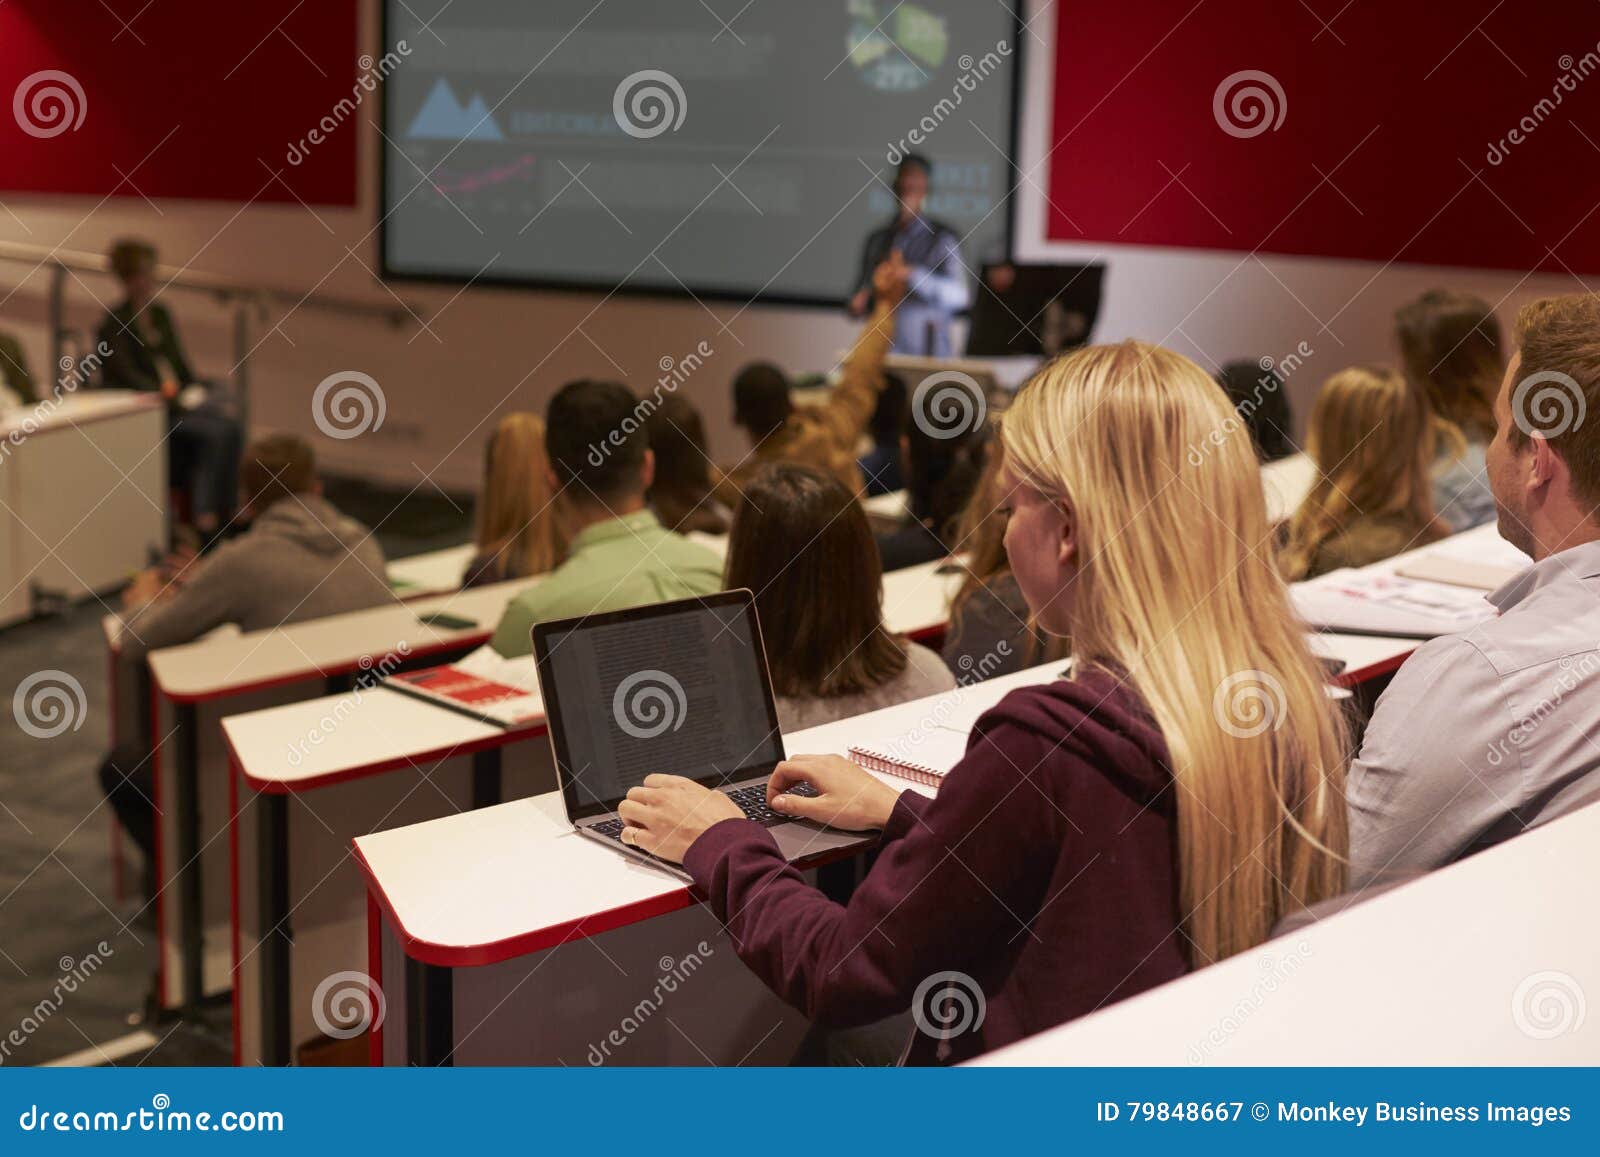 adult student using laptop computer at a university lecture